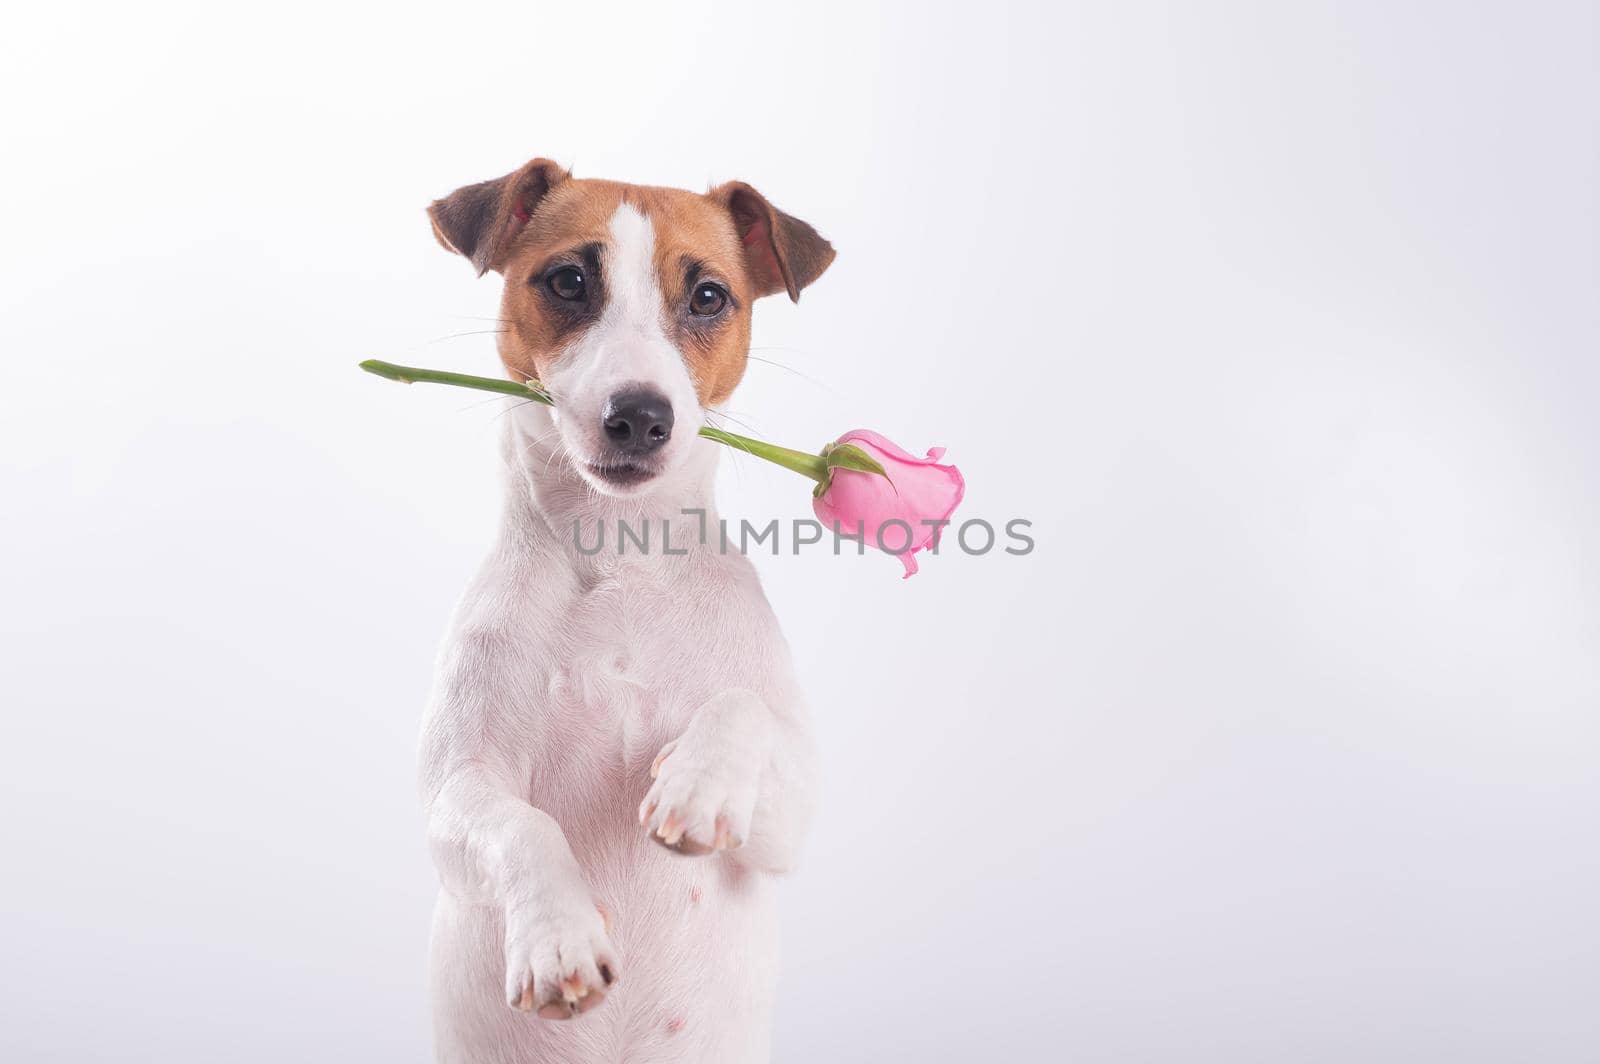 Jack Russell Terrier holds flowers in his mouth on a white background. A dog gives a romantic gift on a date.